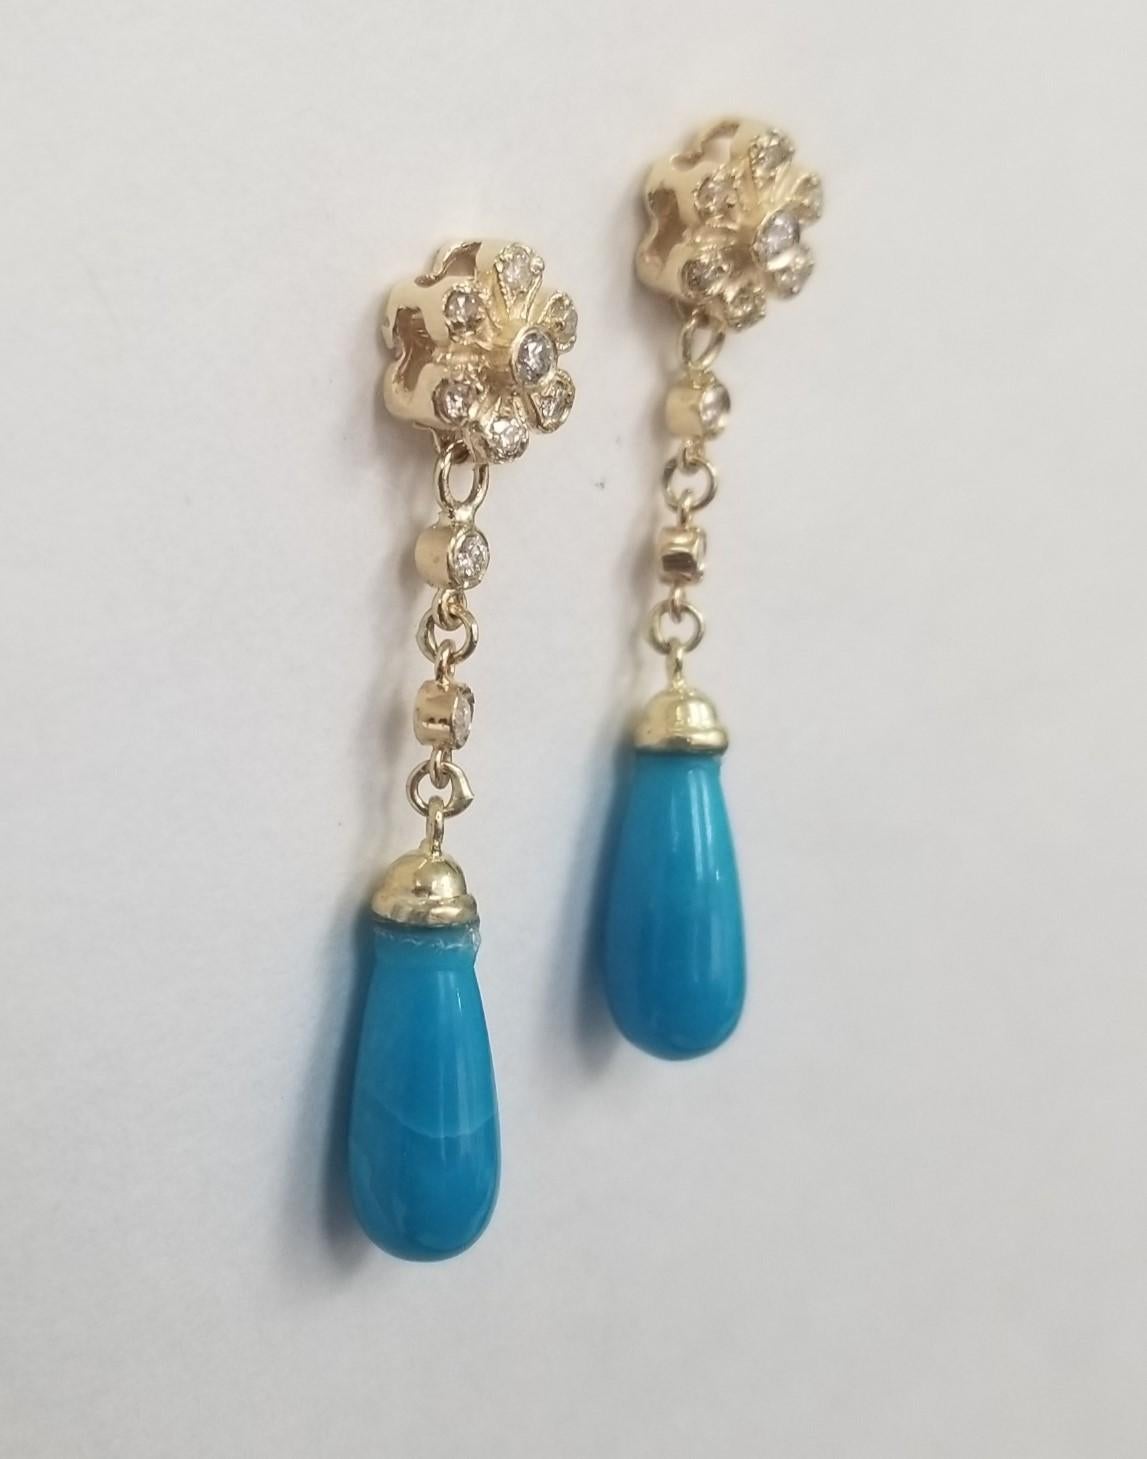 14K YELLOW AND WHITE GOLD CORAL DANGLE EARRINGS WITH DIAMONDS 
Specifications:
    MAIN stone:  Turquoise 6 x 12mm
    DIAMONDS: 18 pcs round diamonds
    CARAT TOTAL WEIGHT: approx .35 CTW
    COLOR/clarity: G/VS2
    brand: UNBRANDED
    metal: